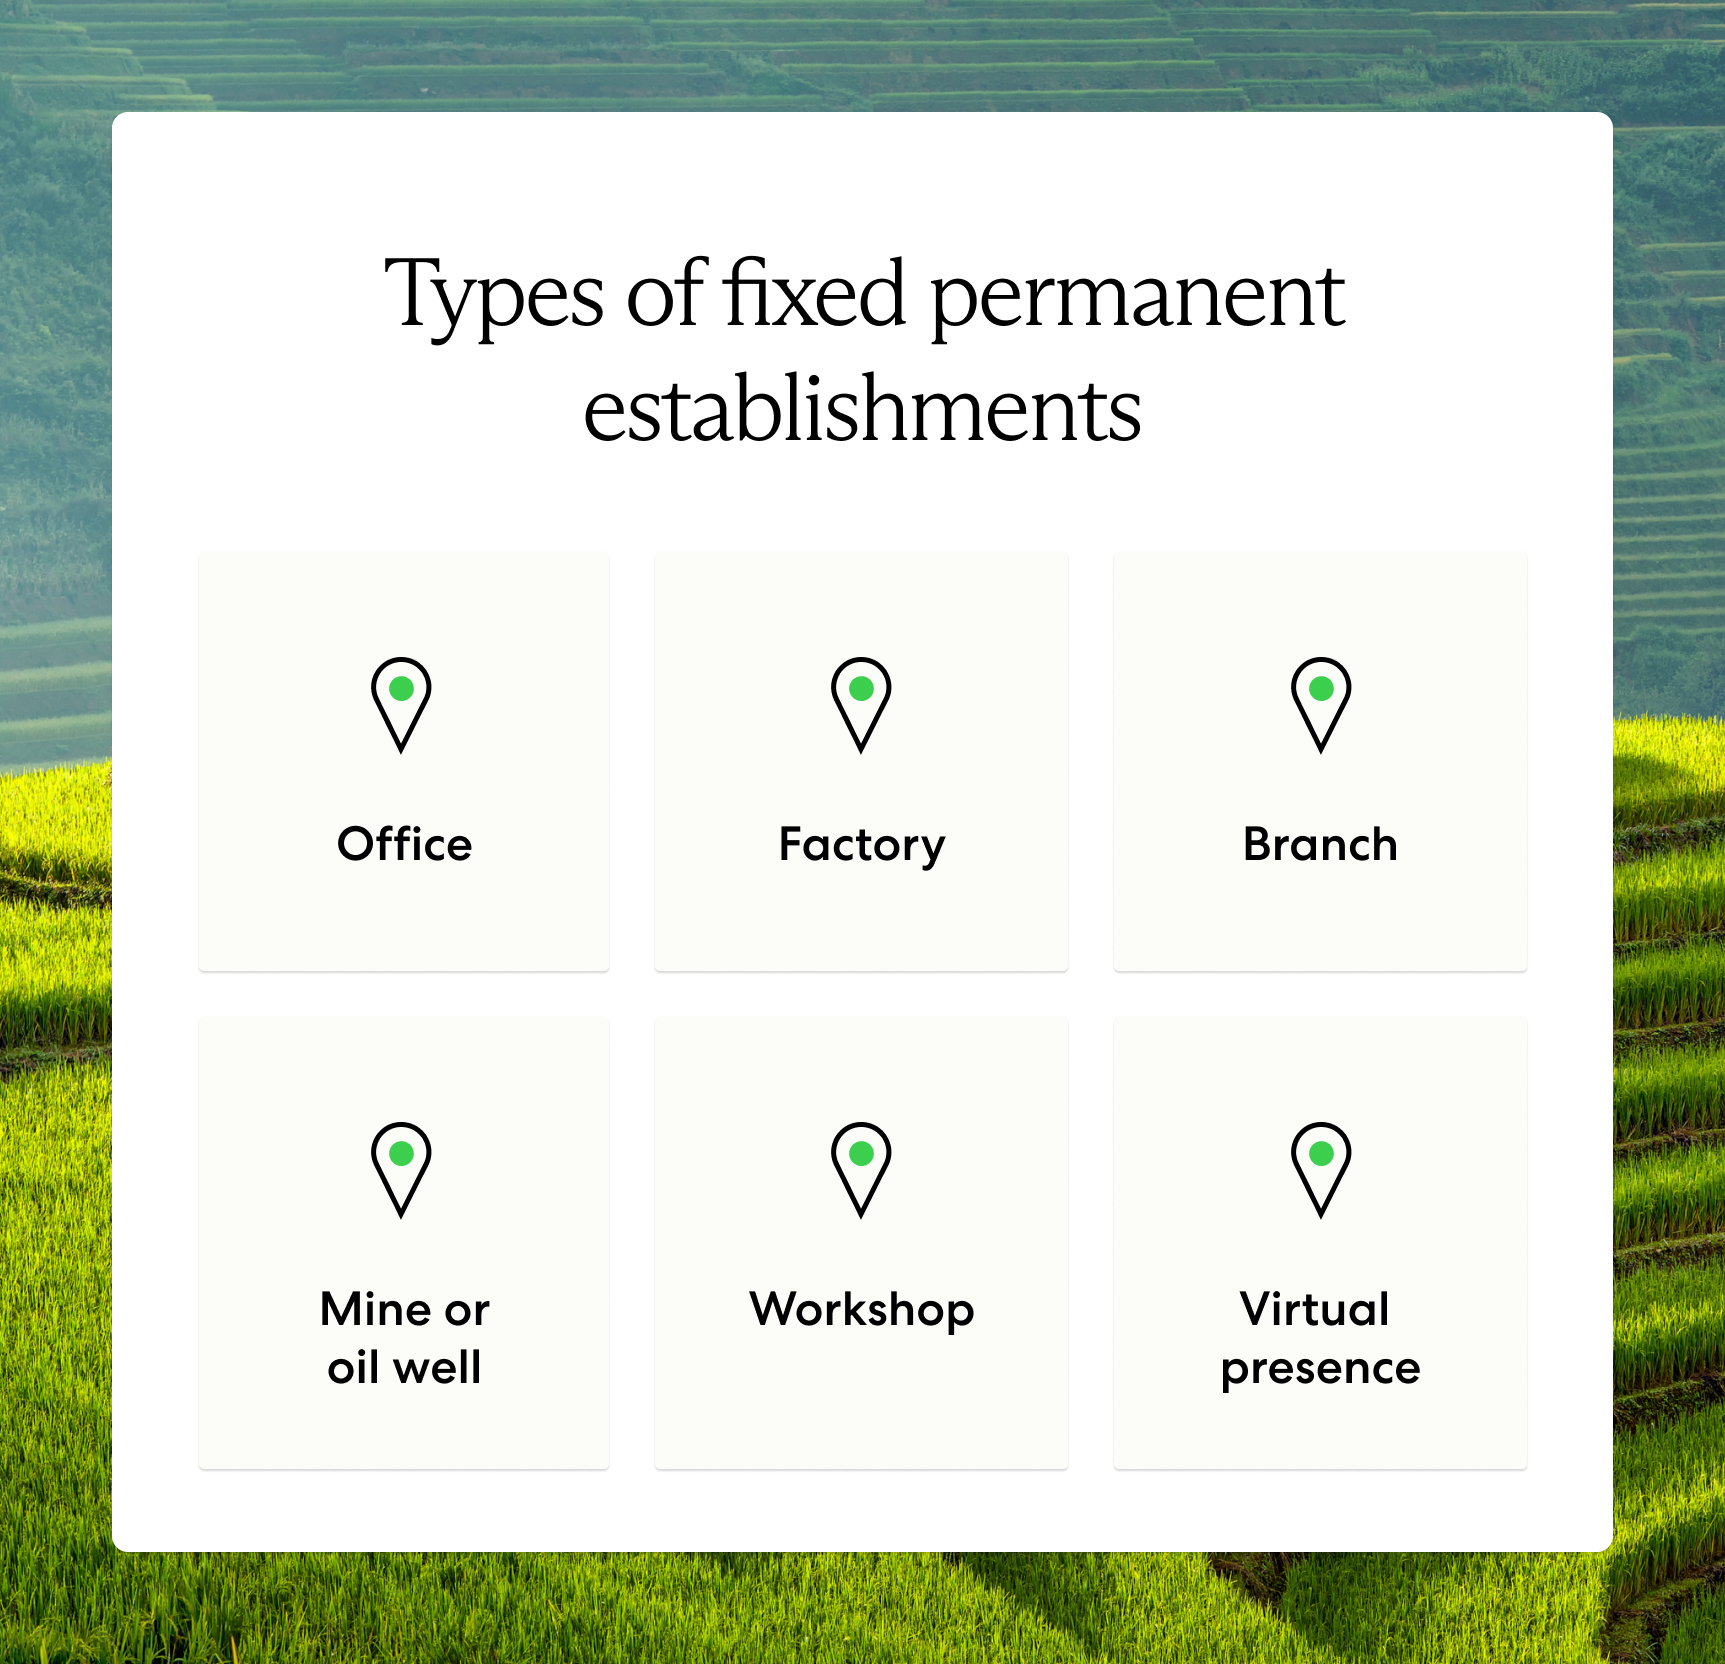 Graphic illustrating different types of permanent establishments which include office, factory, branch, mine or oil well, workshop, and virtual presence.